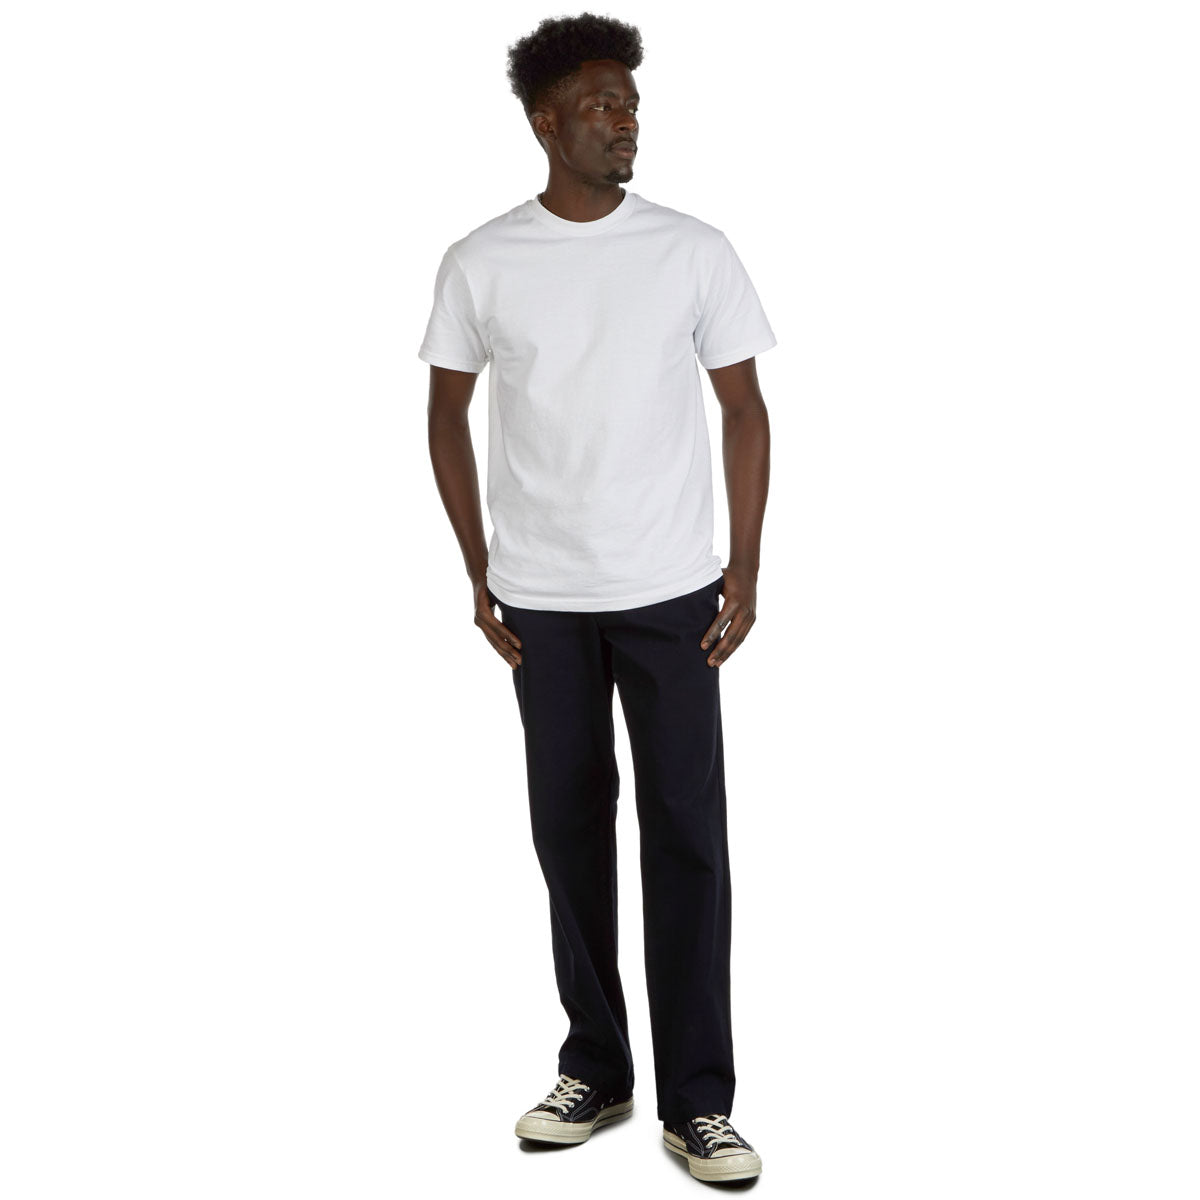 CCS Standard Plus Relaxed Chino Pants - Navy image 2